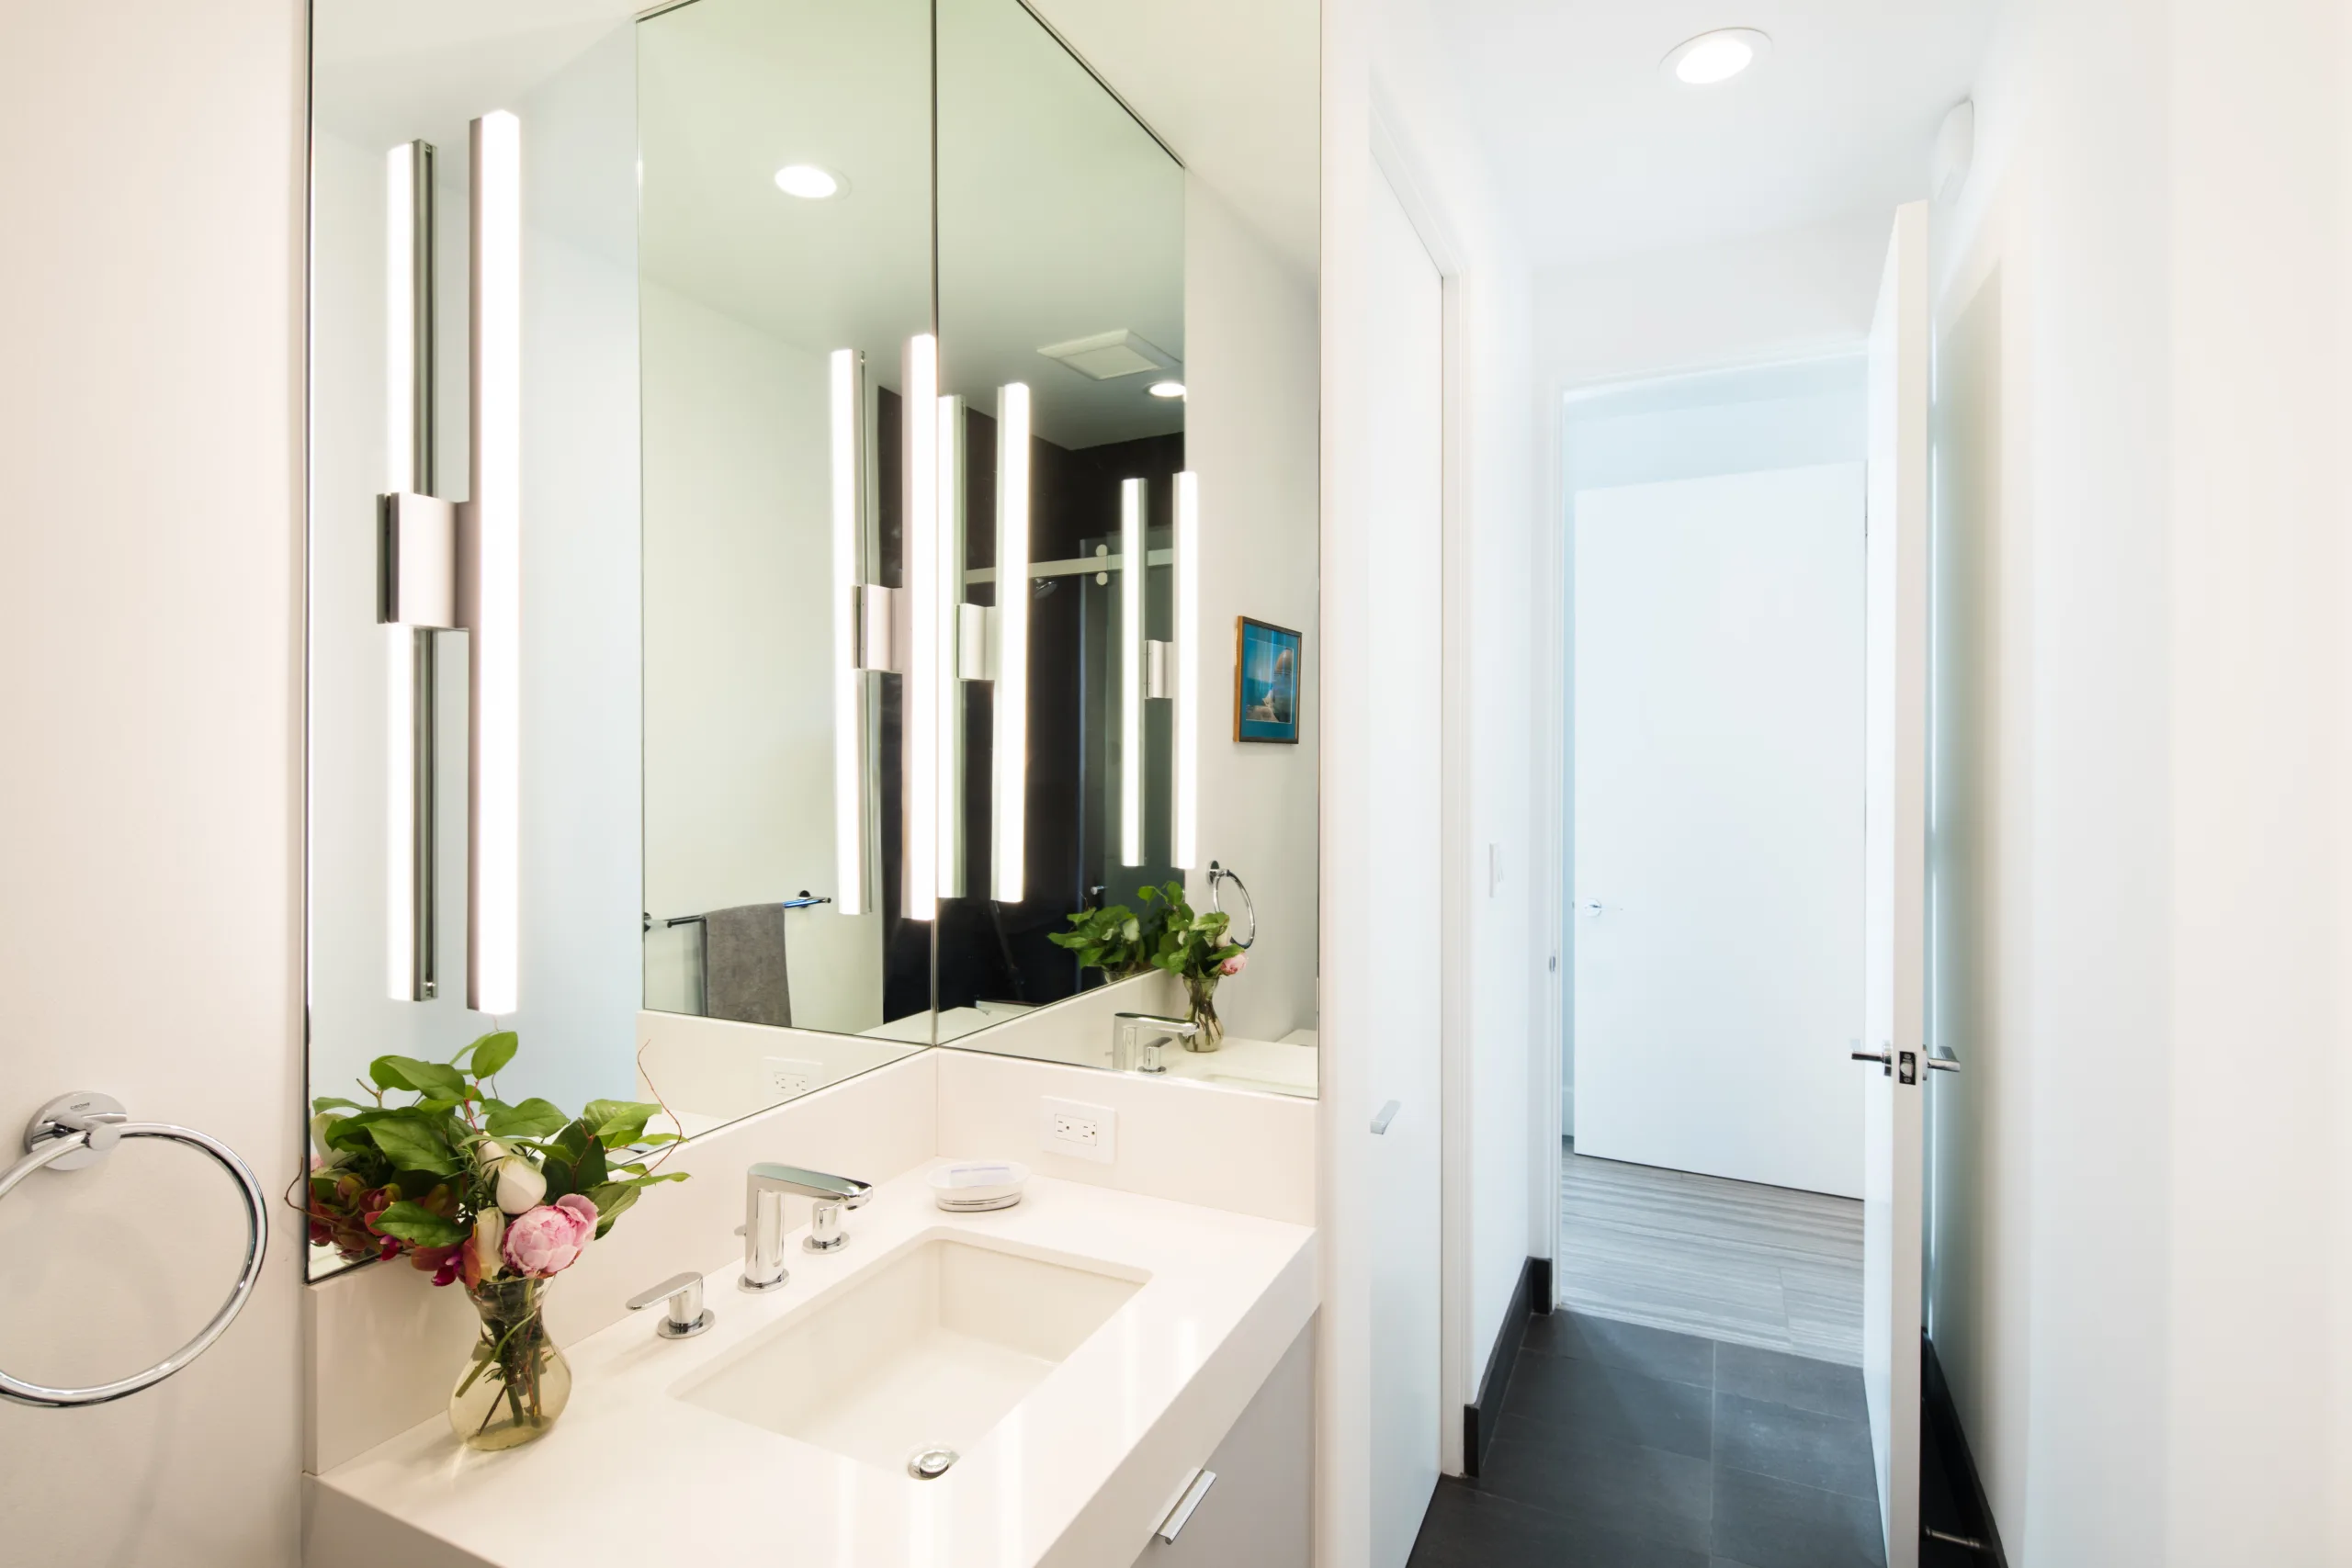 A modern bathroom with a white sink and mirror.